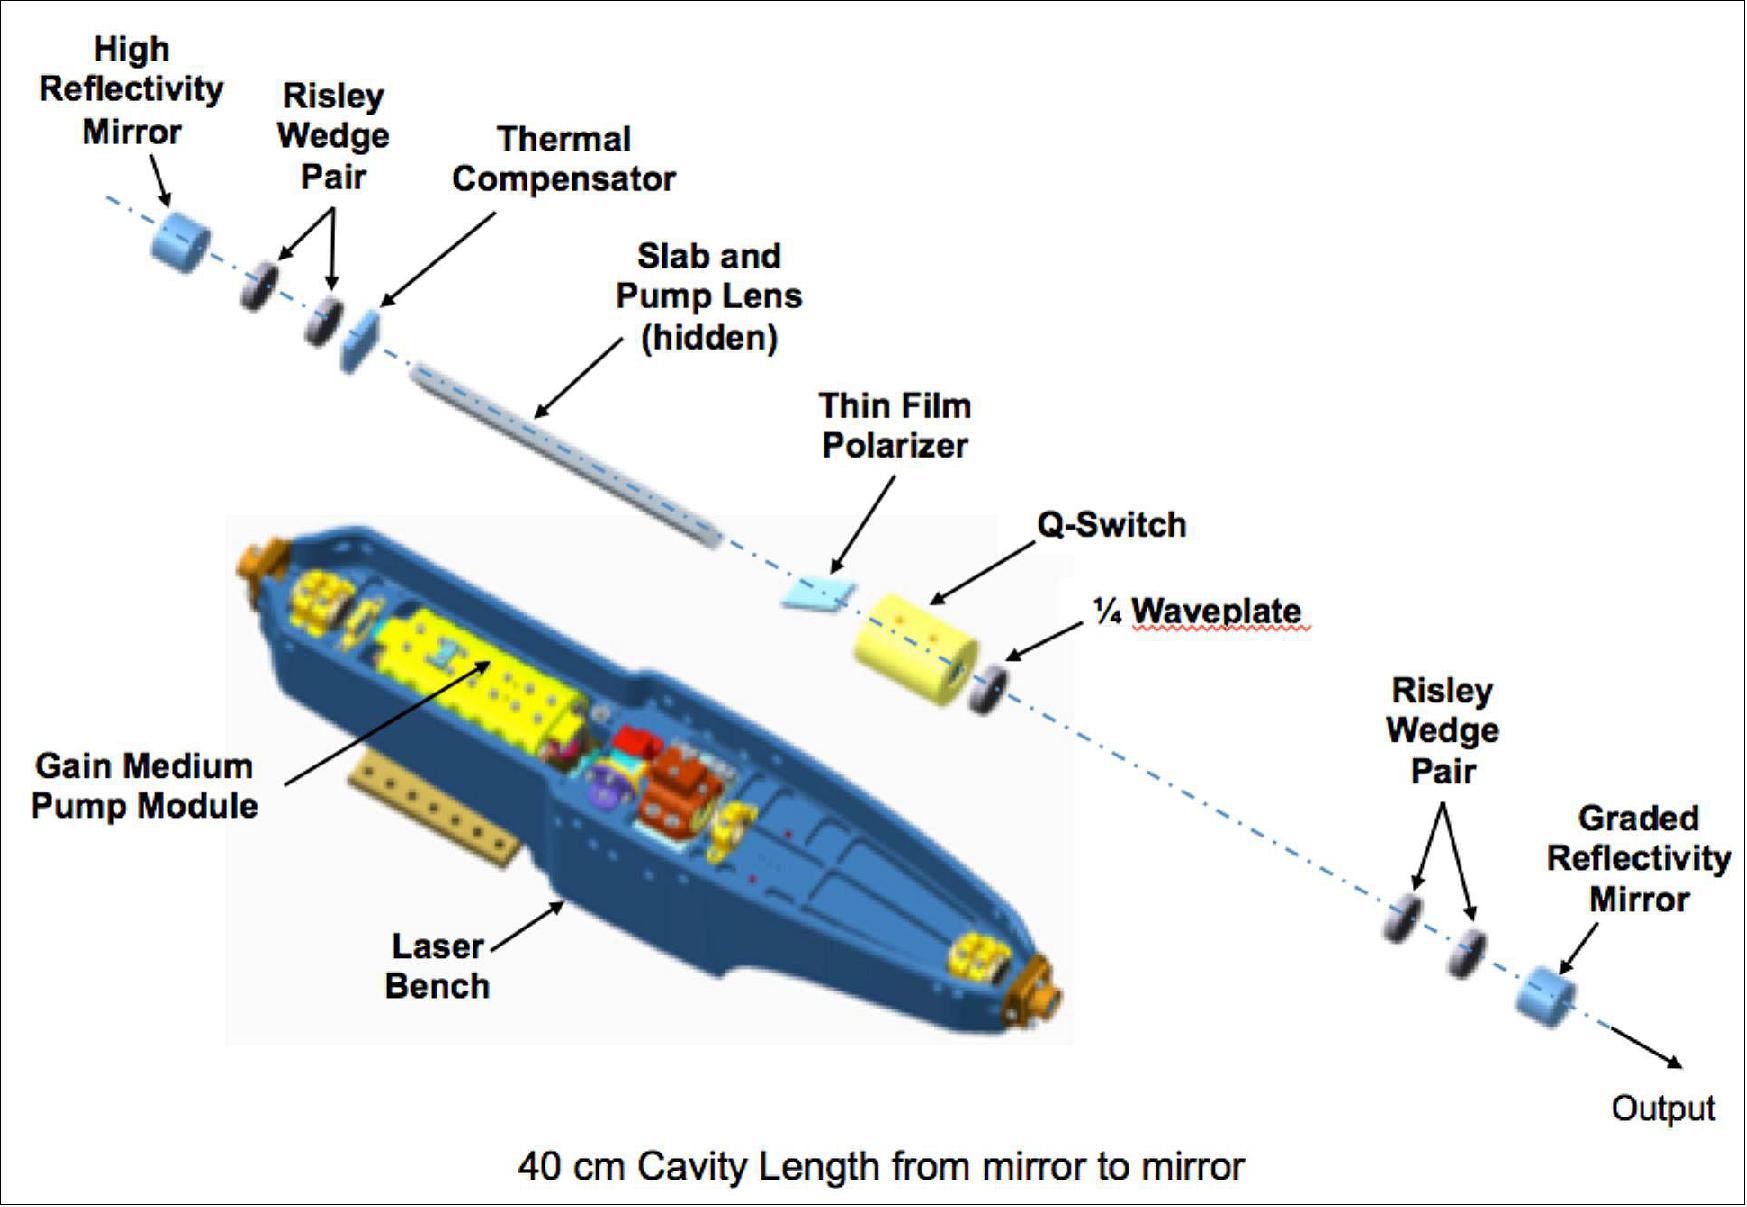 Figure 23: The GEDI Laser optical cavity layout featuring a 22 bounce slab and a GRM can be seen at the top. This is implemented in the laser optical bench (in blue) and the pump module seen below the layout (image credit: NASA)